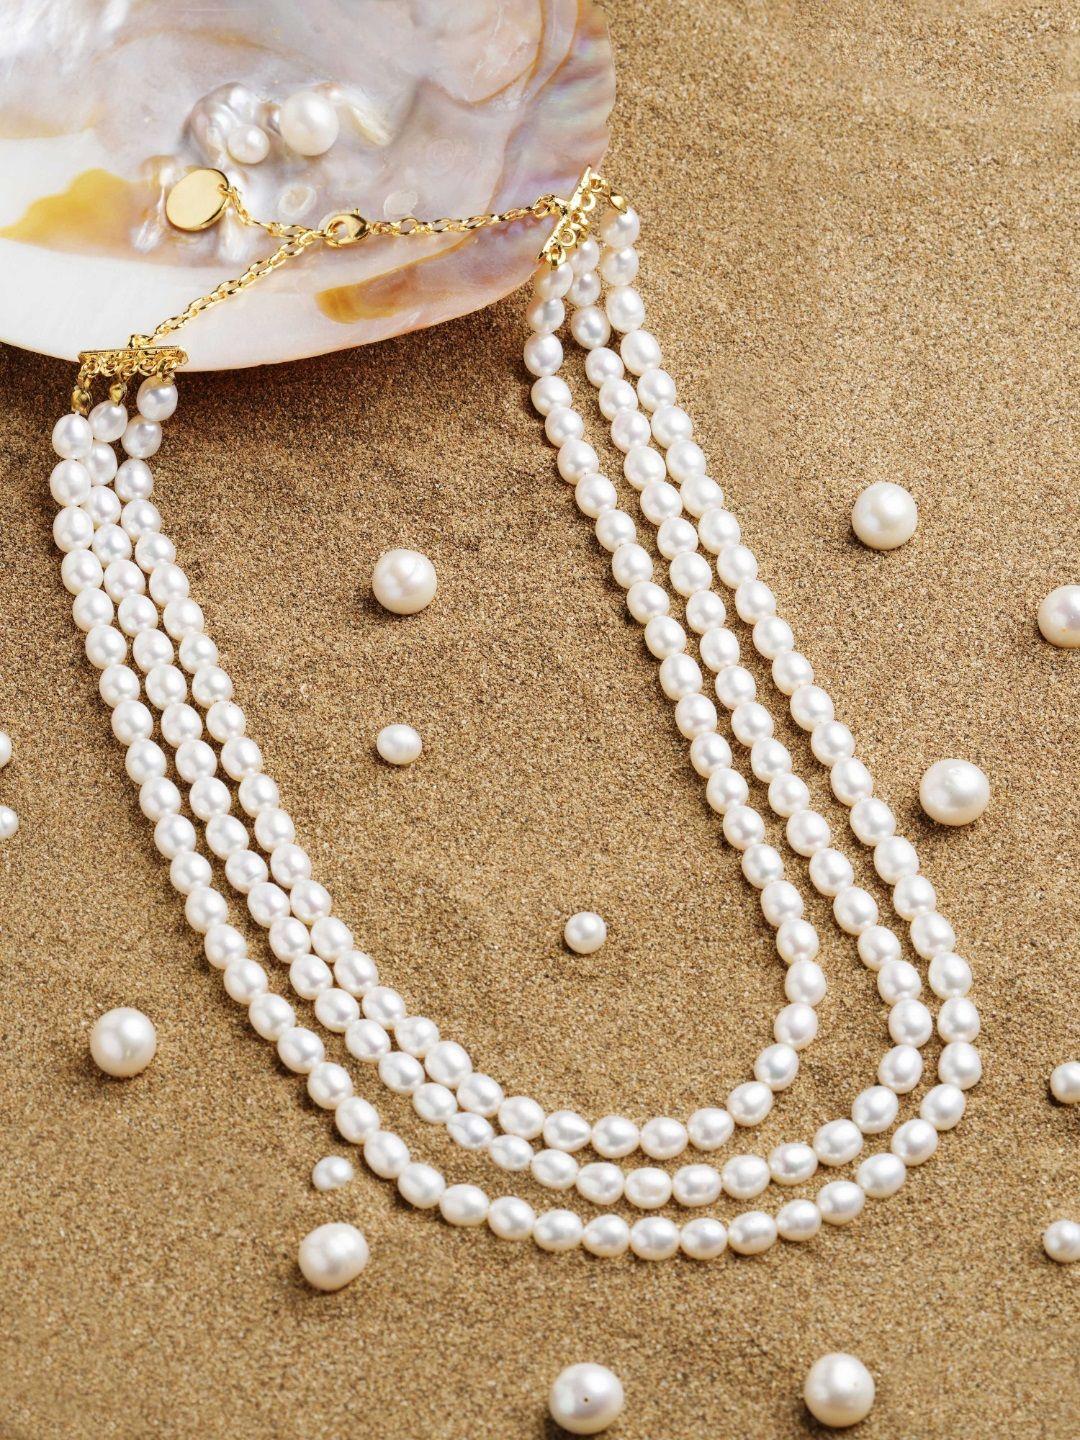 zaveri pearls off white freshwater rice pearls aaa+ quality 3 layers necklace